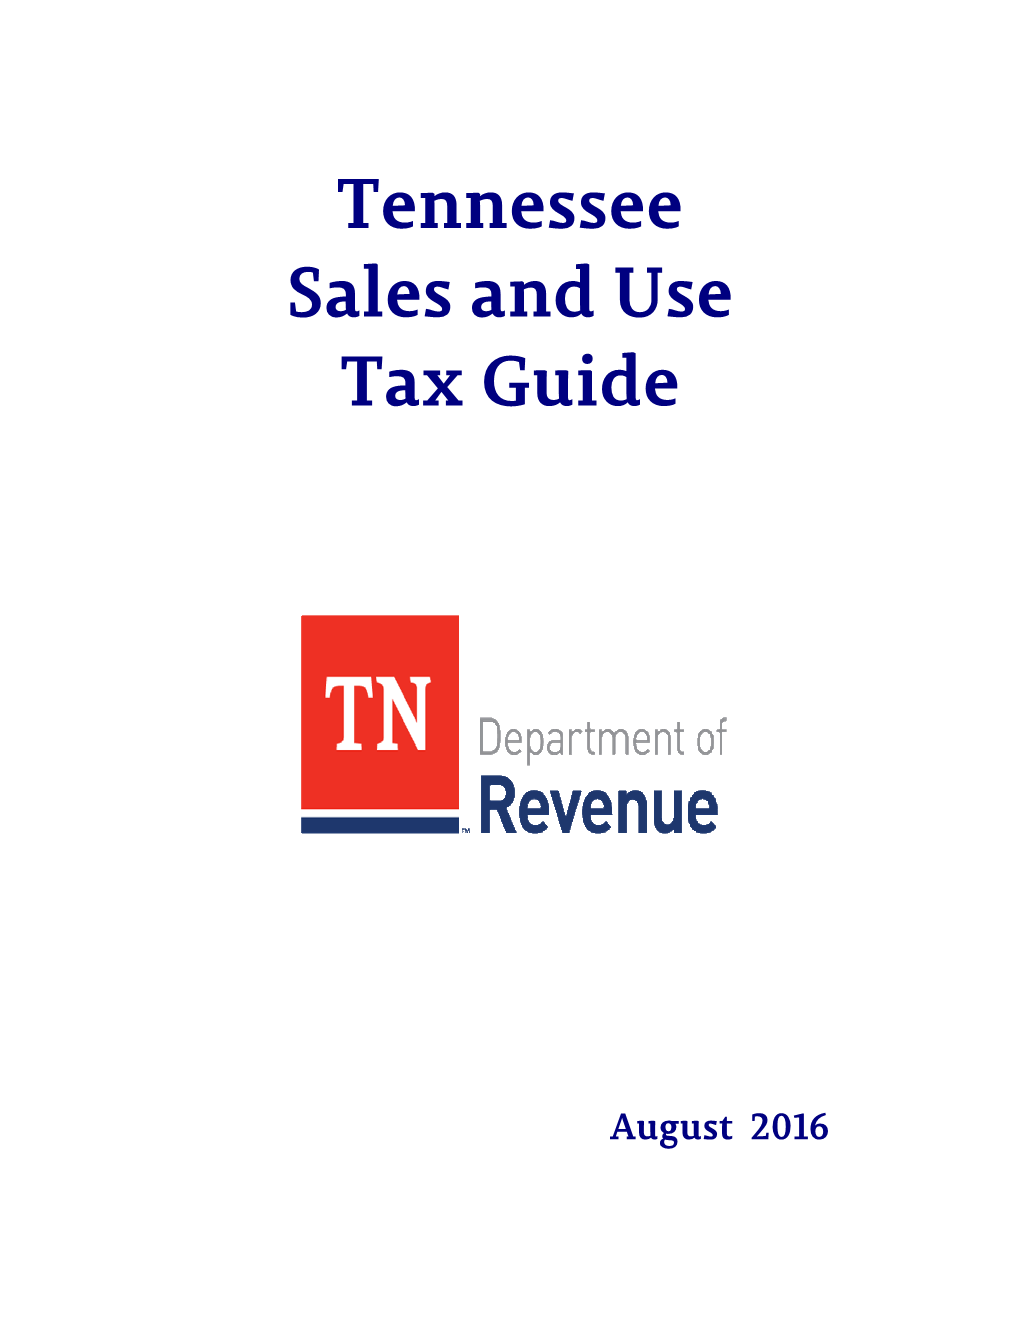 2016 TN Sales and Use Tax Guide